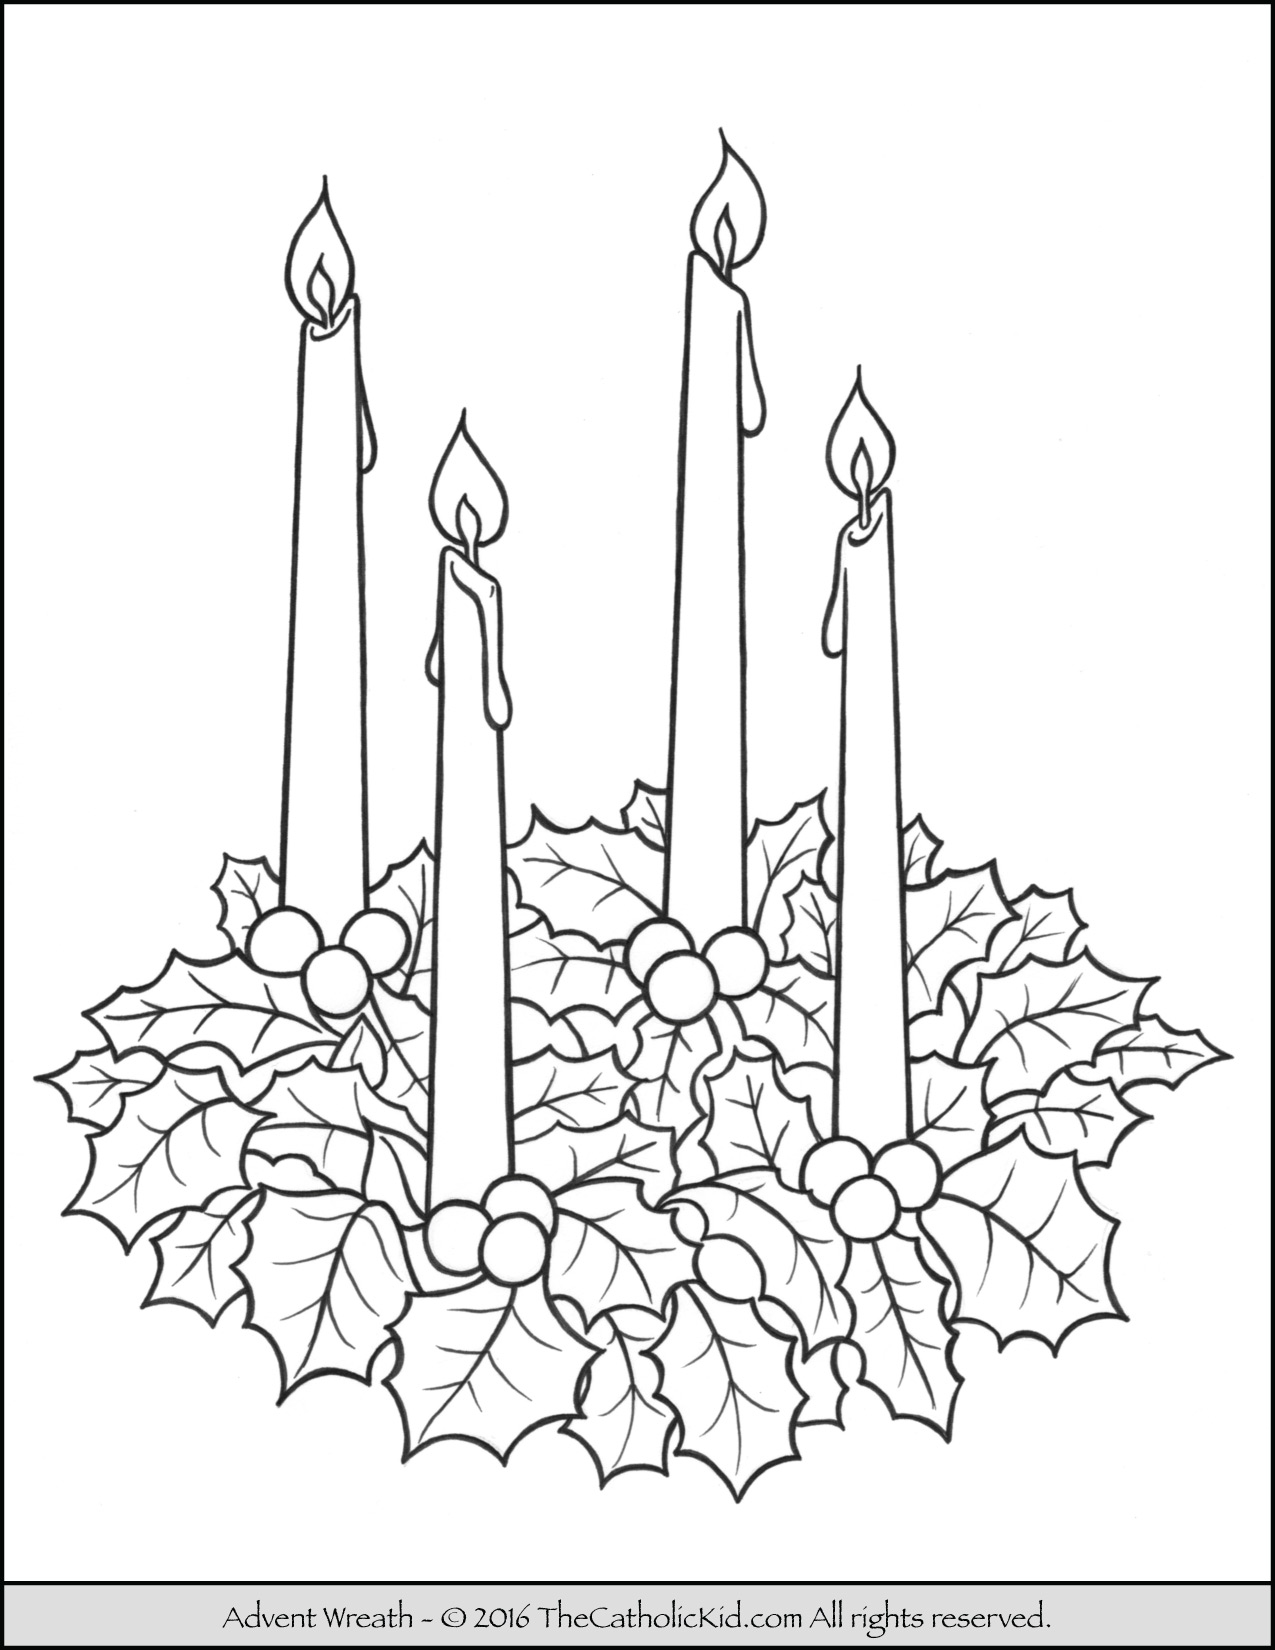 Advent Wreath Coloring Pages Printable at Free